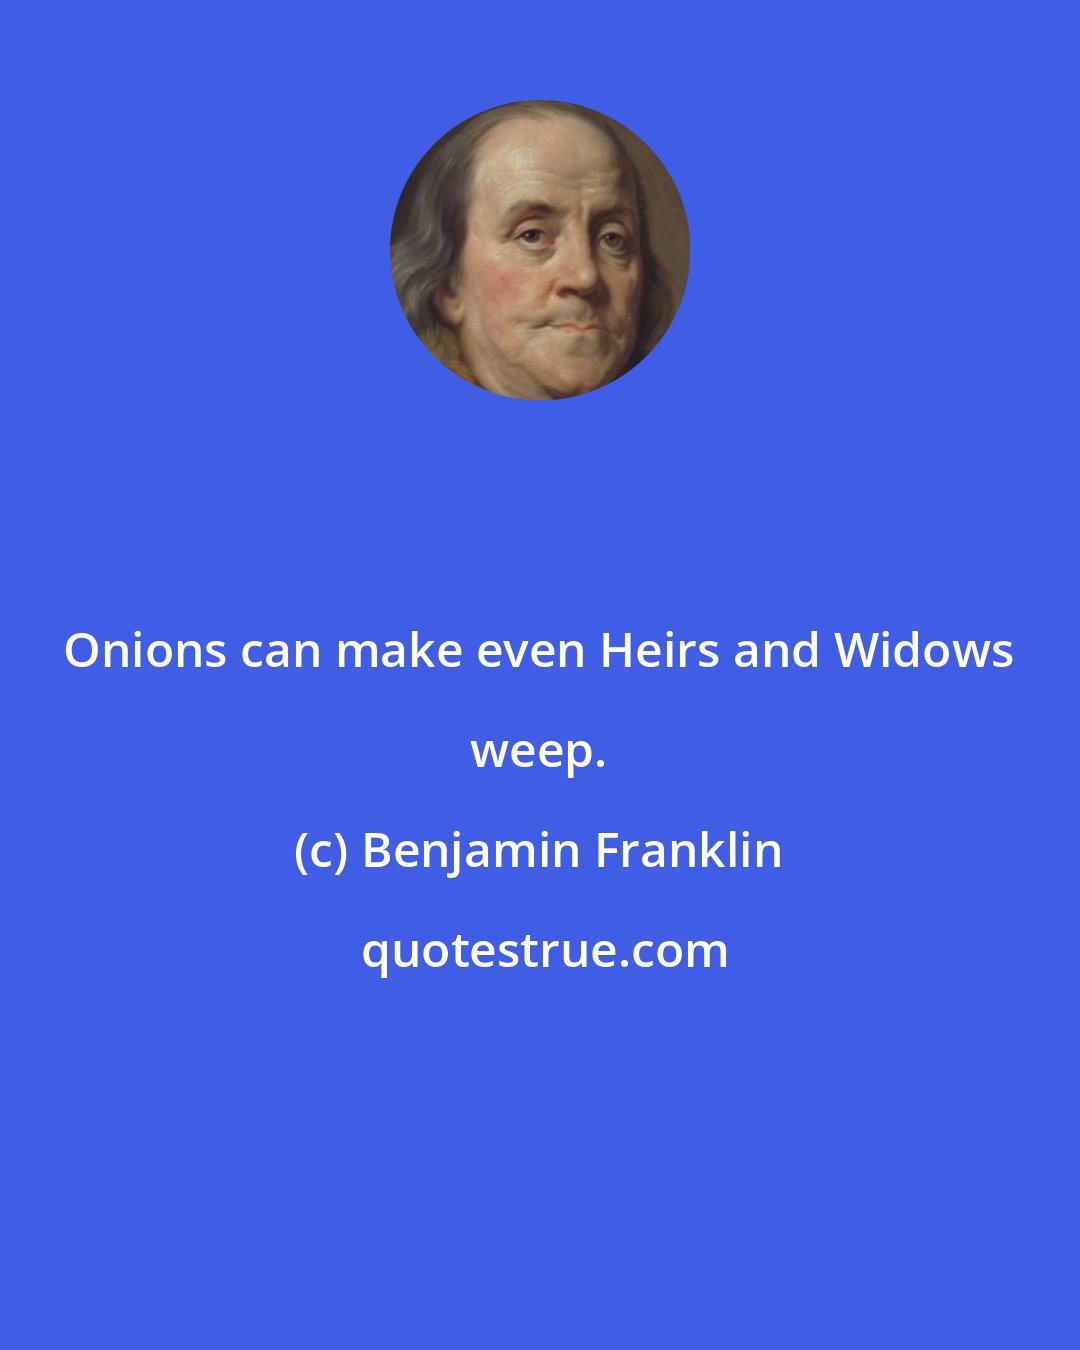 Benjamin Franklin: Onions can make even Heirs and Widows weep.